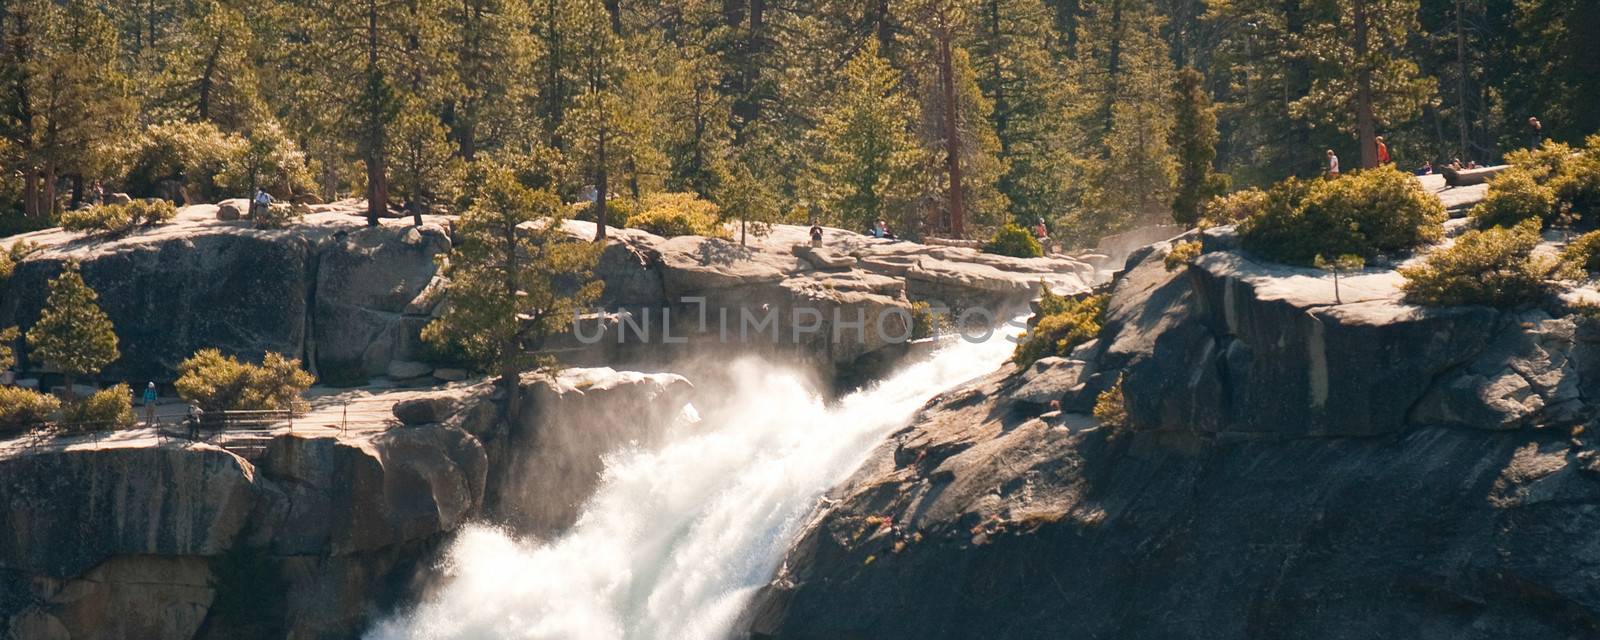 Scenic view of waterfall on mountain with forest in background, Yosemite National Park, California, U.S.A.